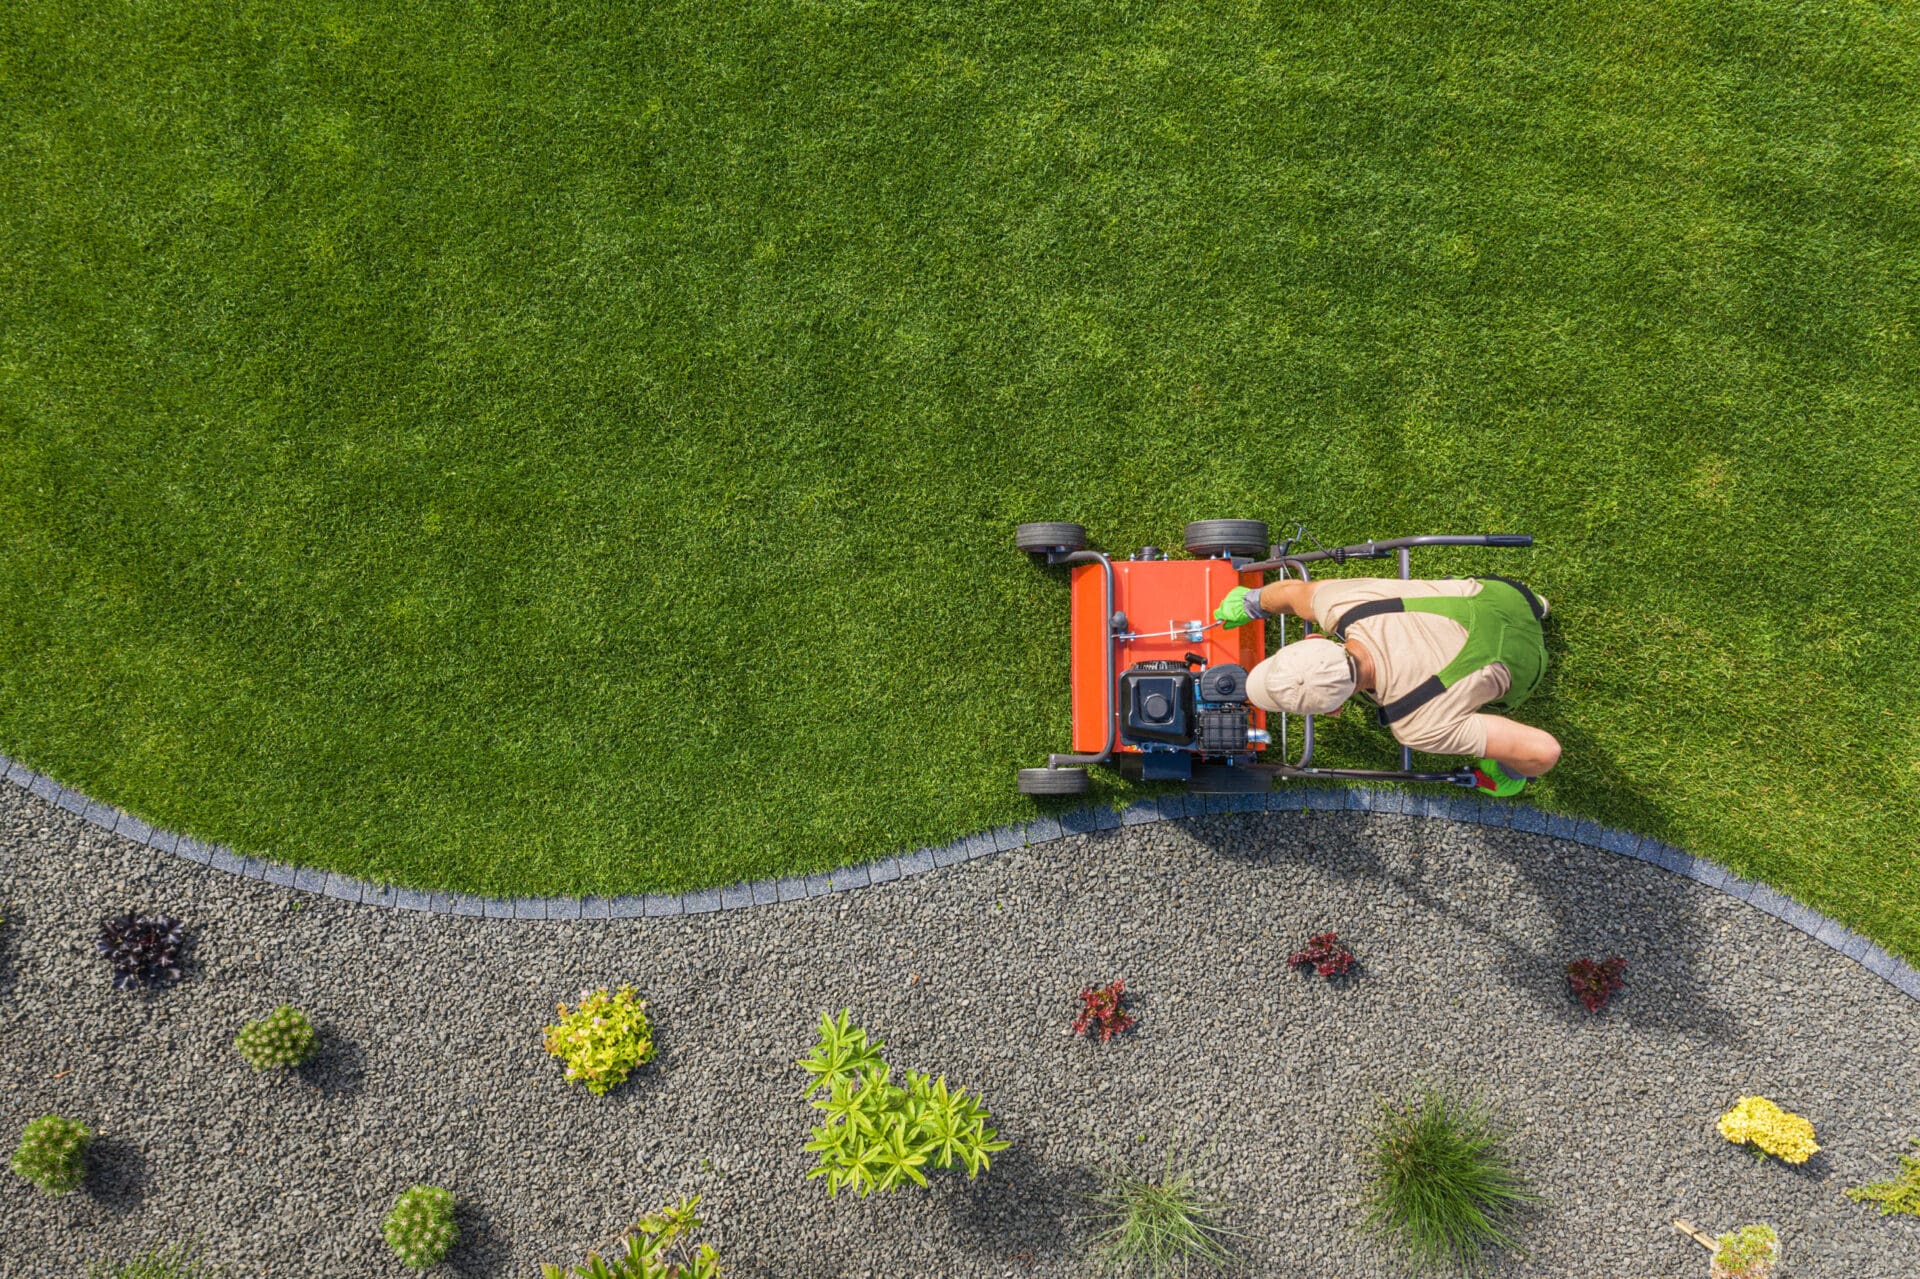 Lawn Care in Nashville - Mowing the Lawn